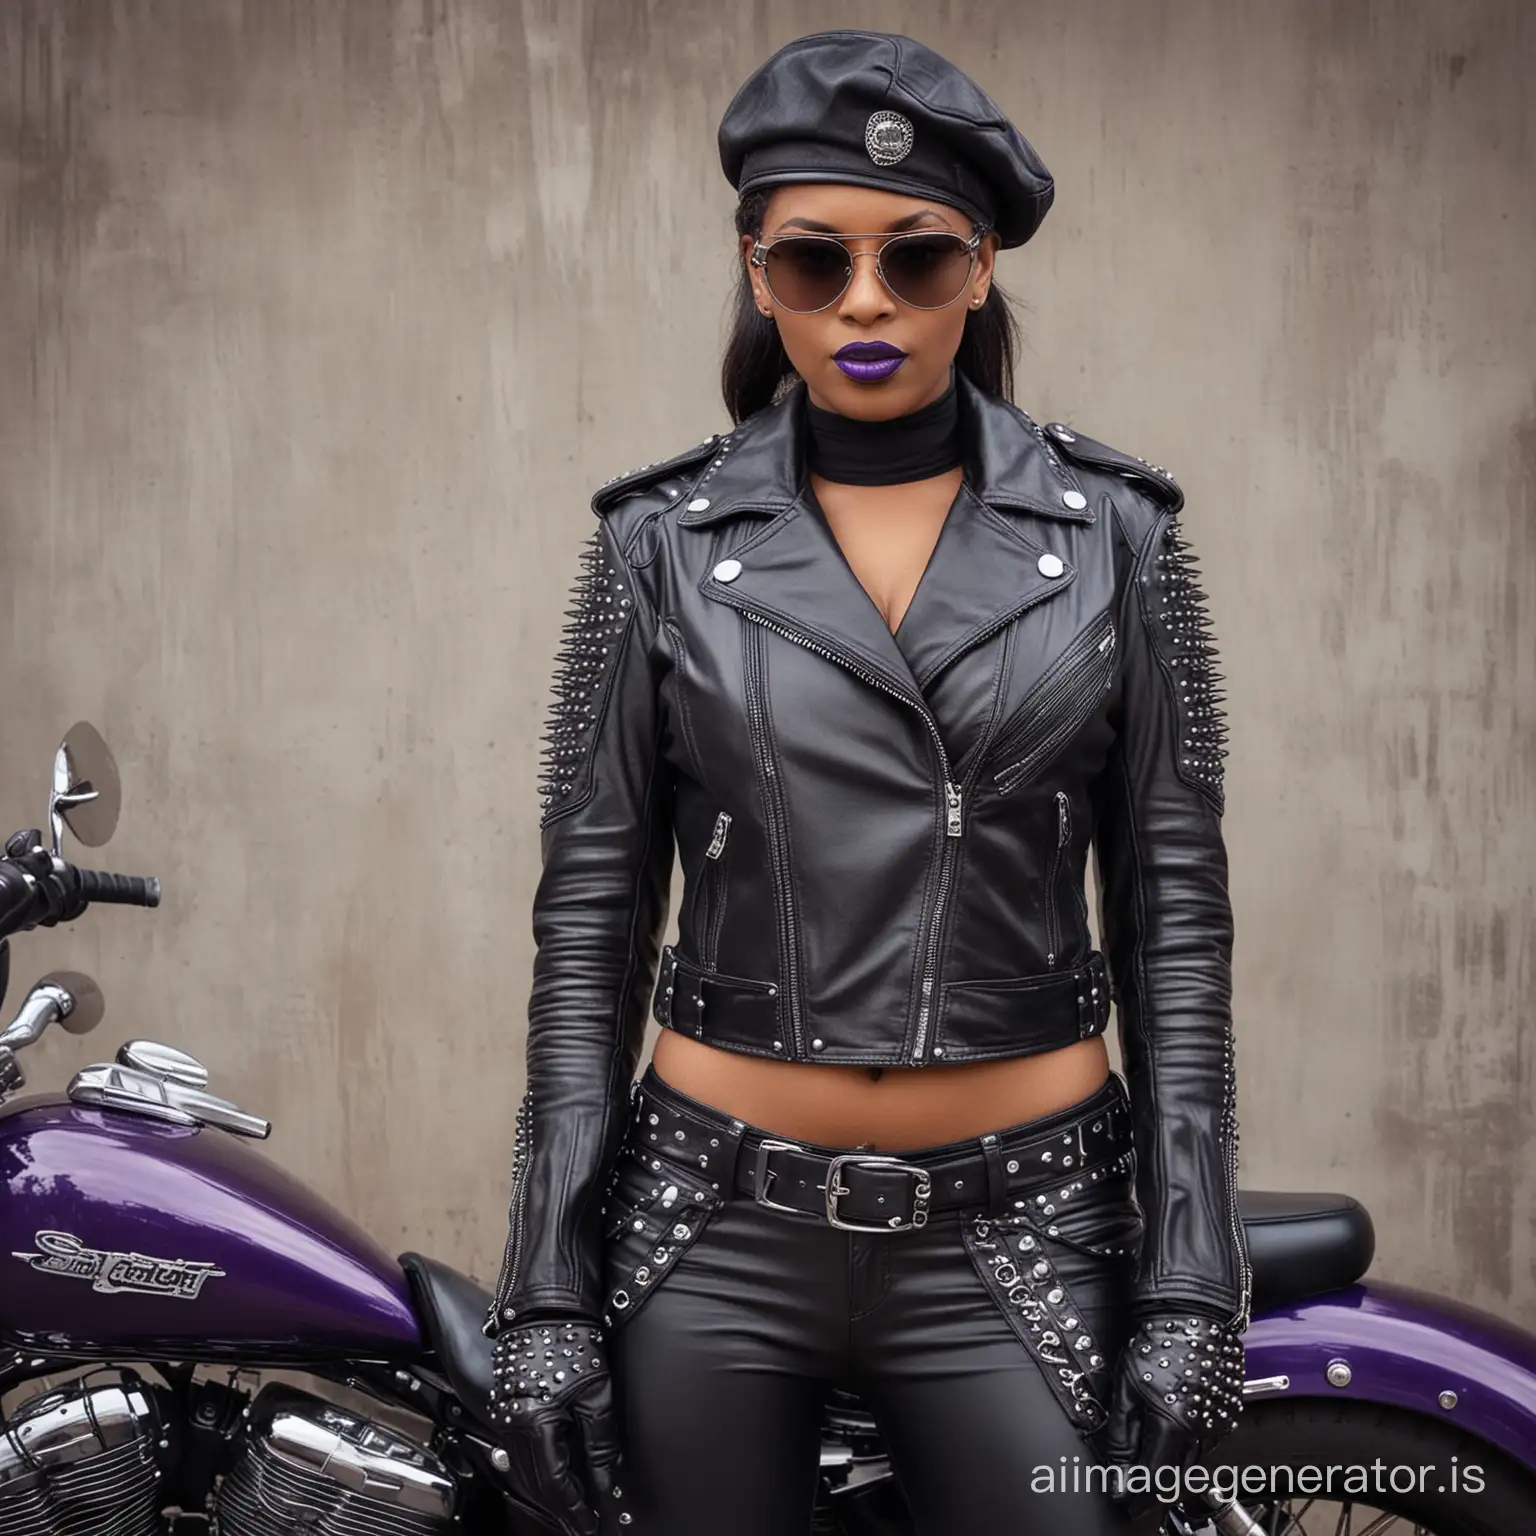 Ebony-Biker-Woman-with-Edgy-Accessories